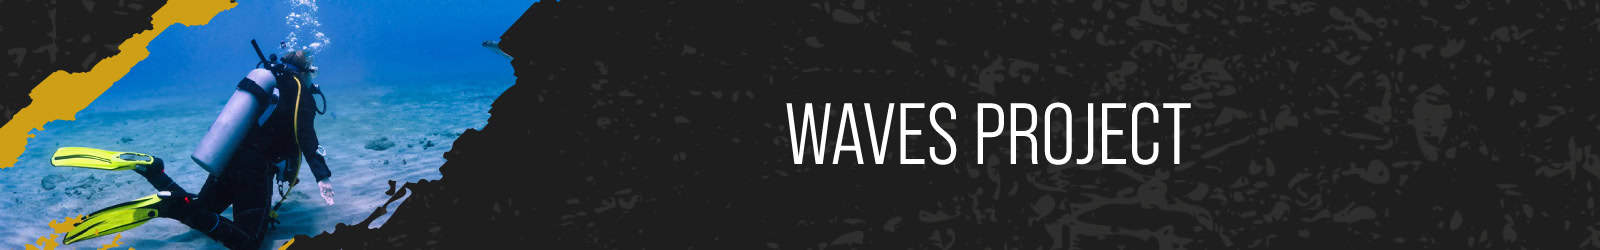 WAVES Project